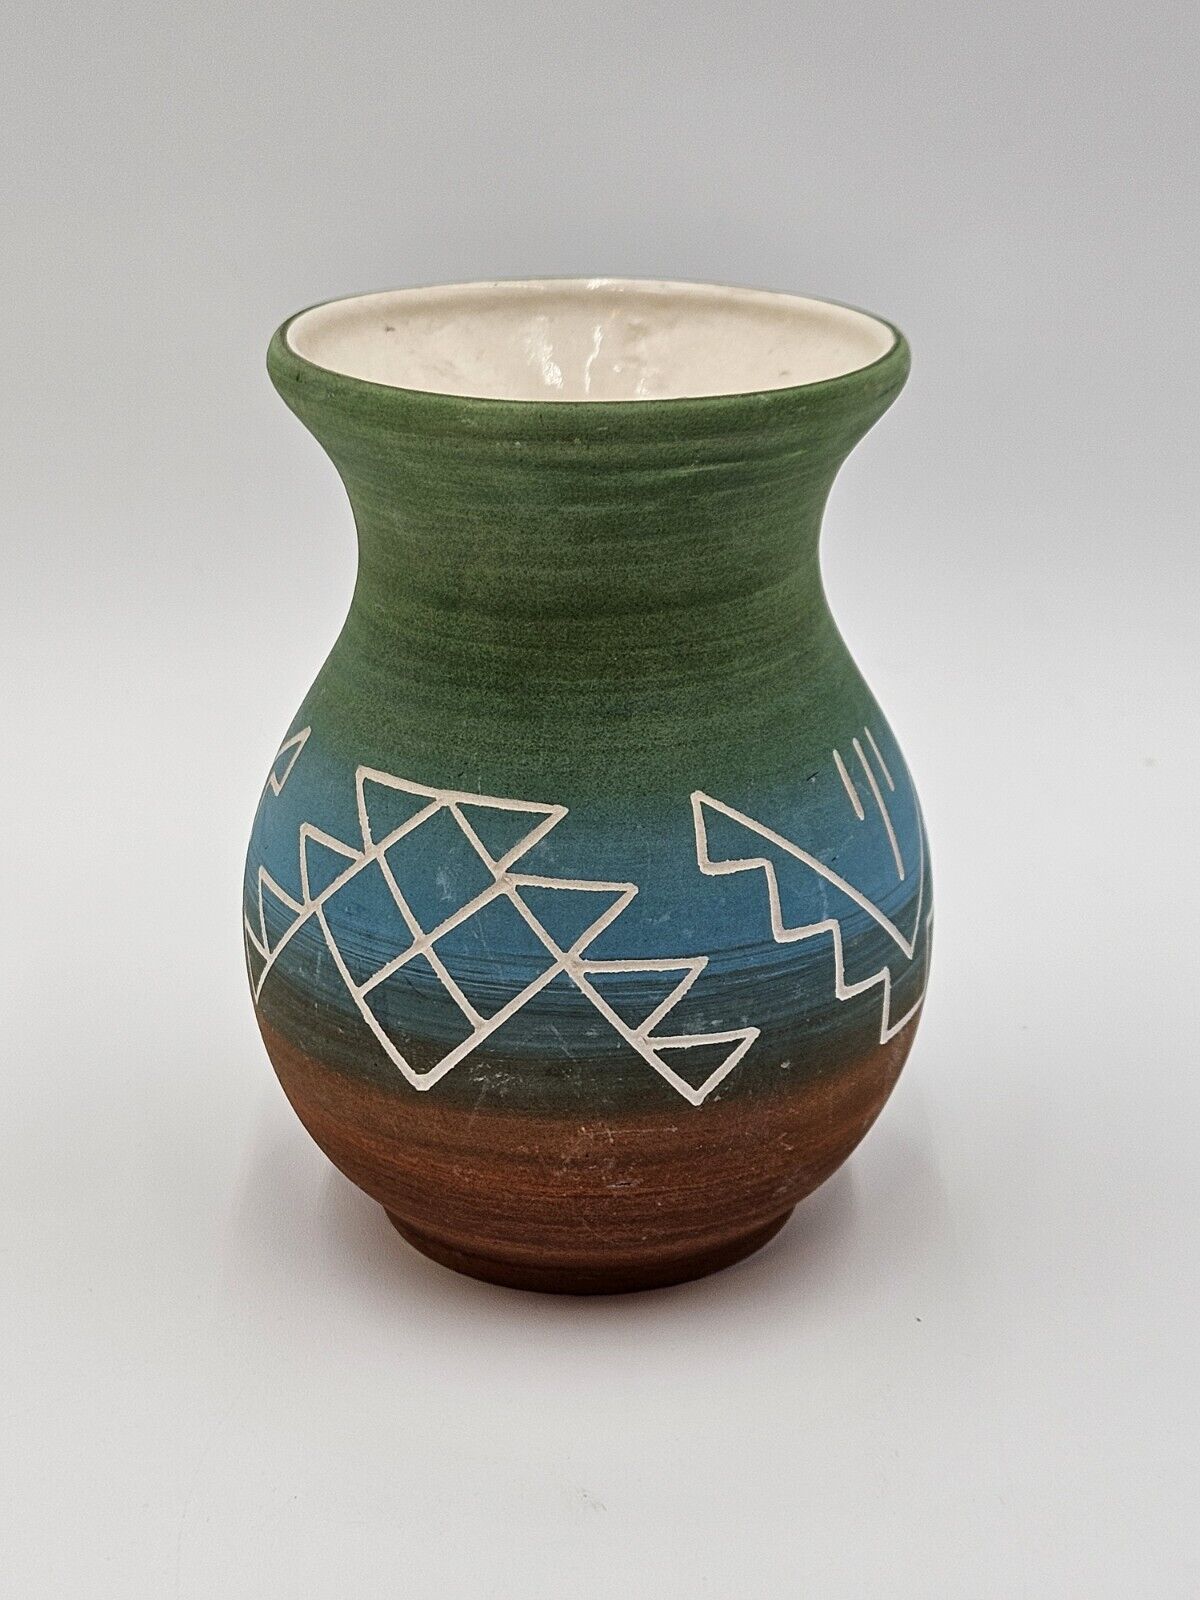 Vintage Native American Pawnee Pottery, Geometric Designs, Green, Blue, Signed 